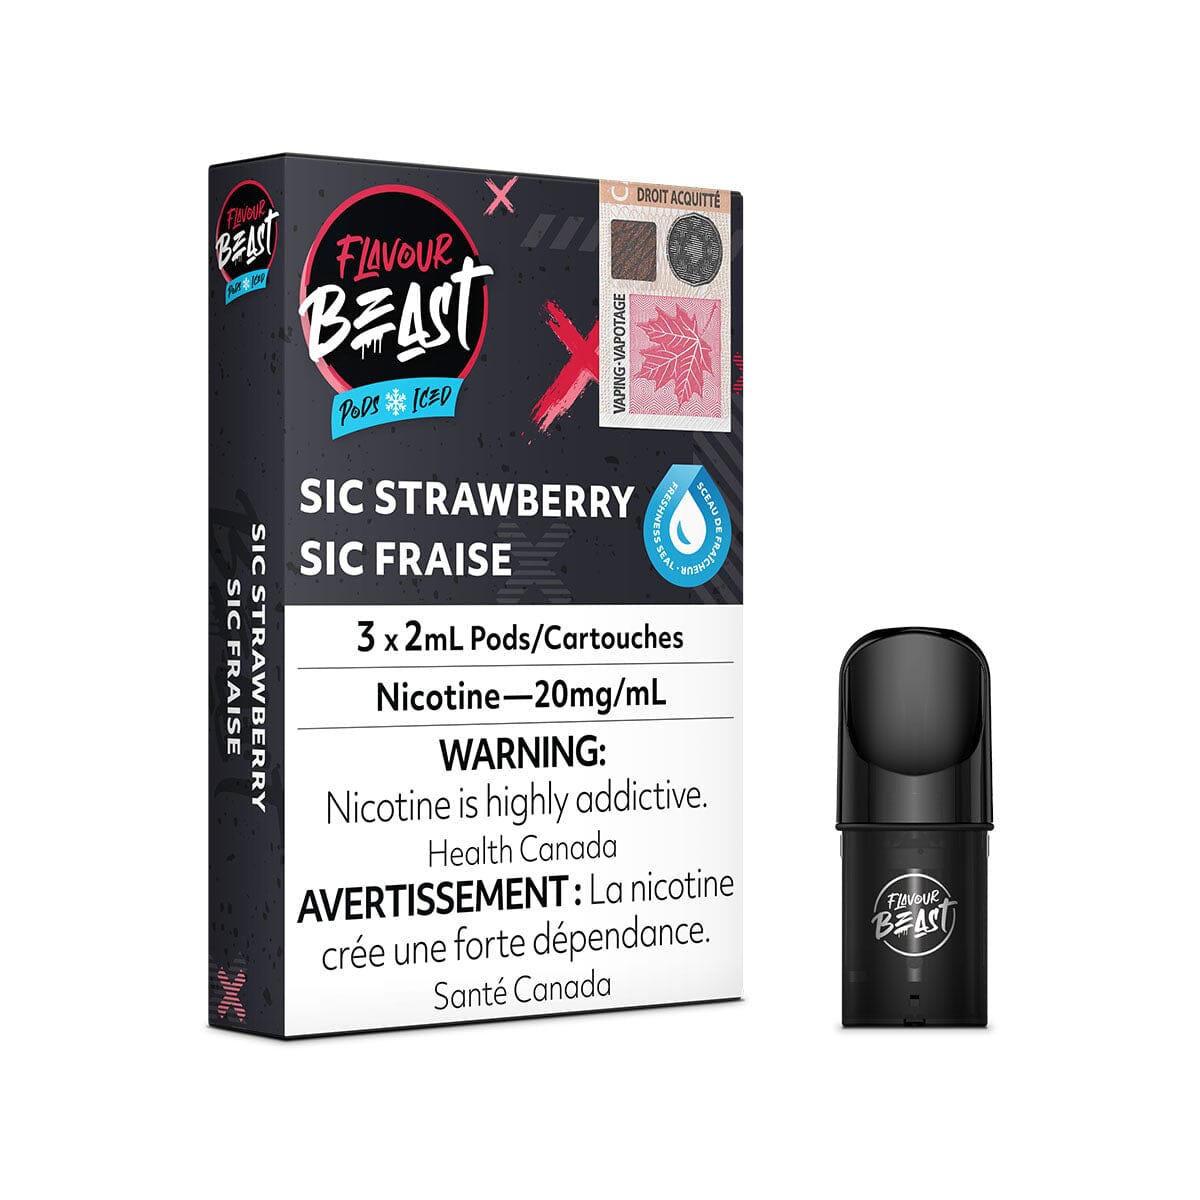 STLTH Compatible Flavour Beast Sic Strawberry Iced Vape Pods Pre-filled Pod Flavour Beast 